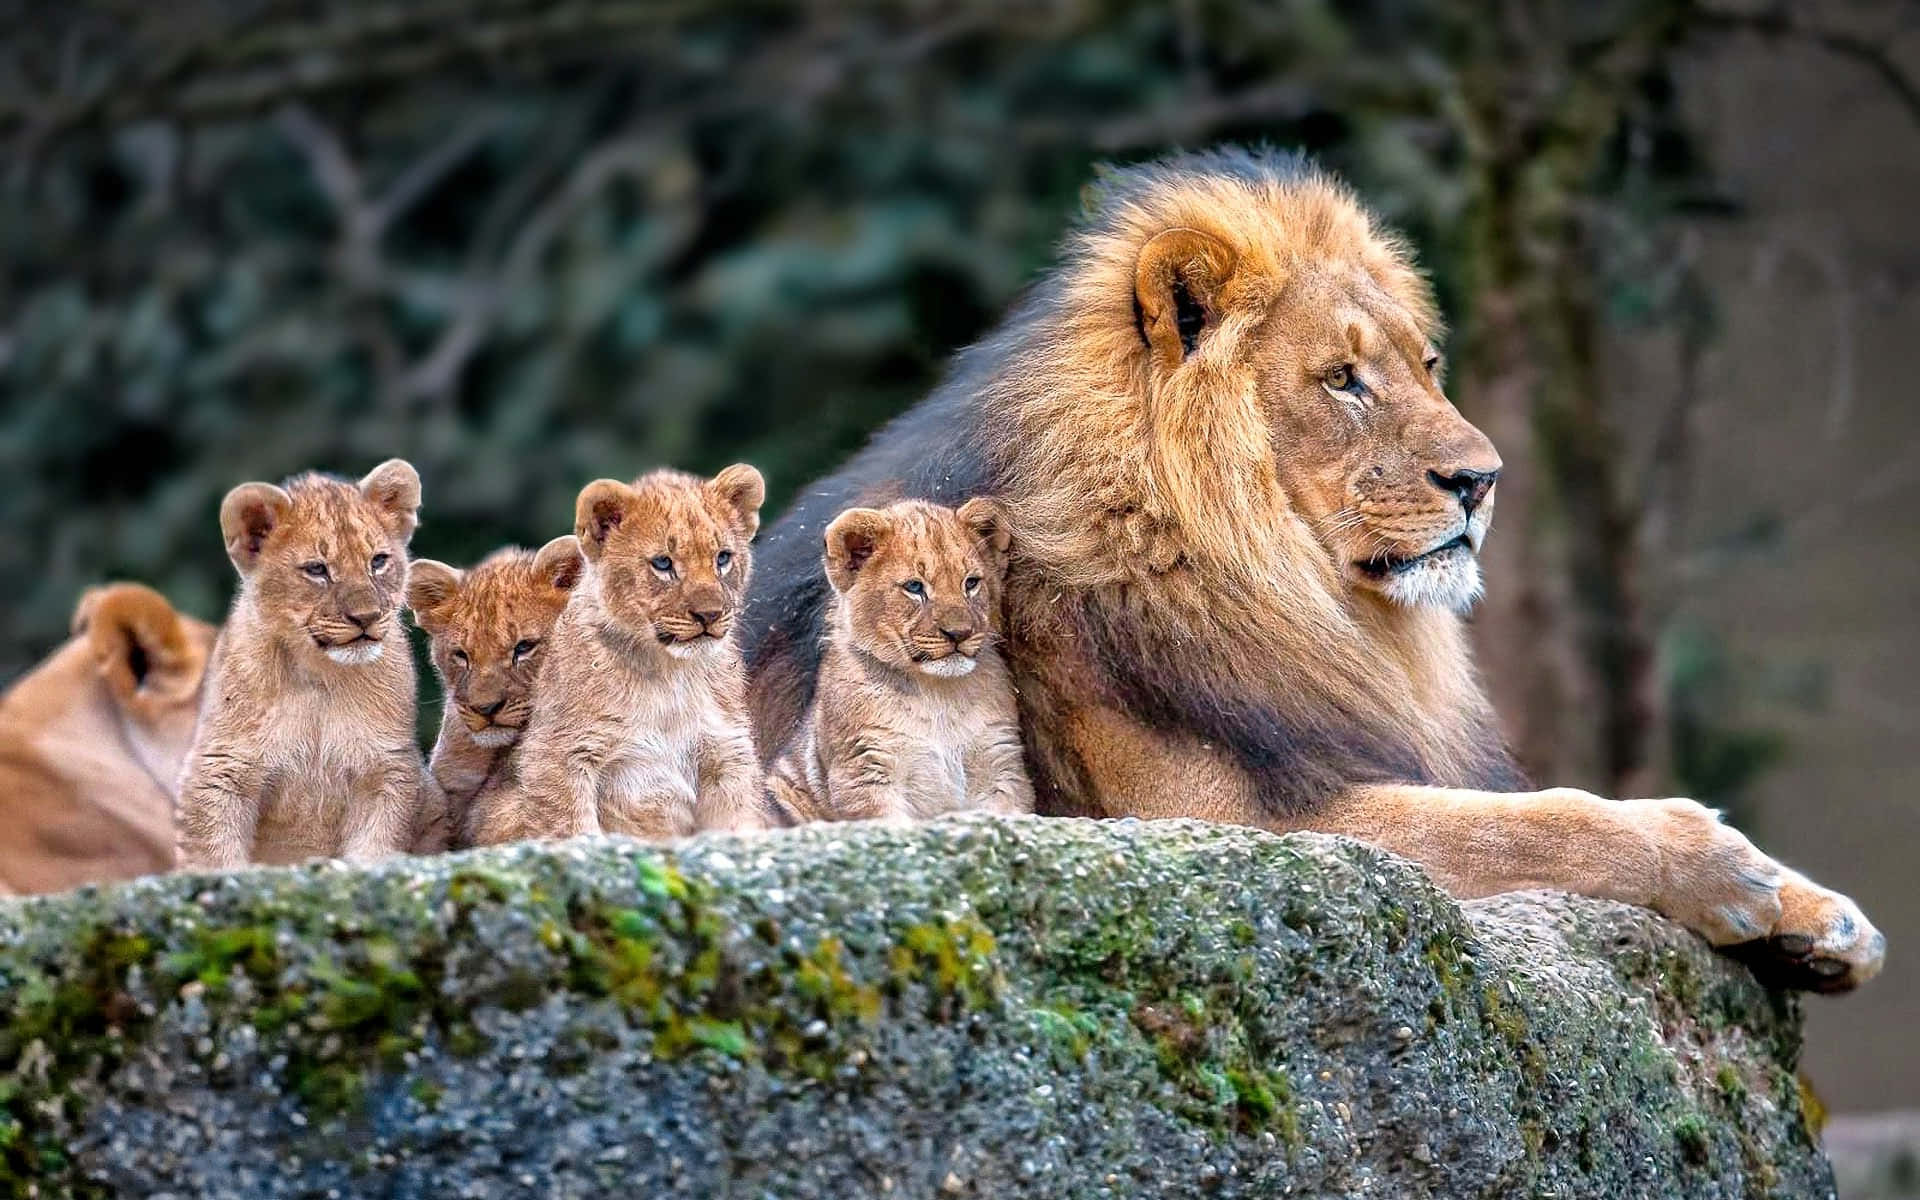 Lions With Their Cubs On A Rock